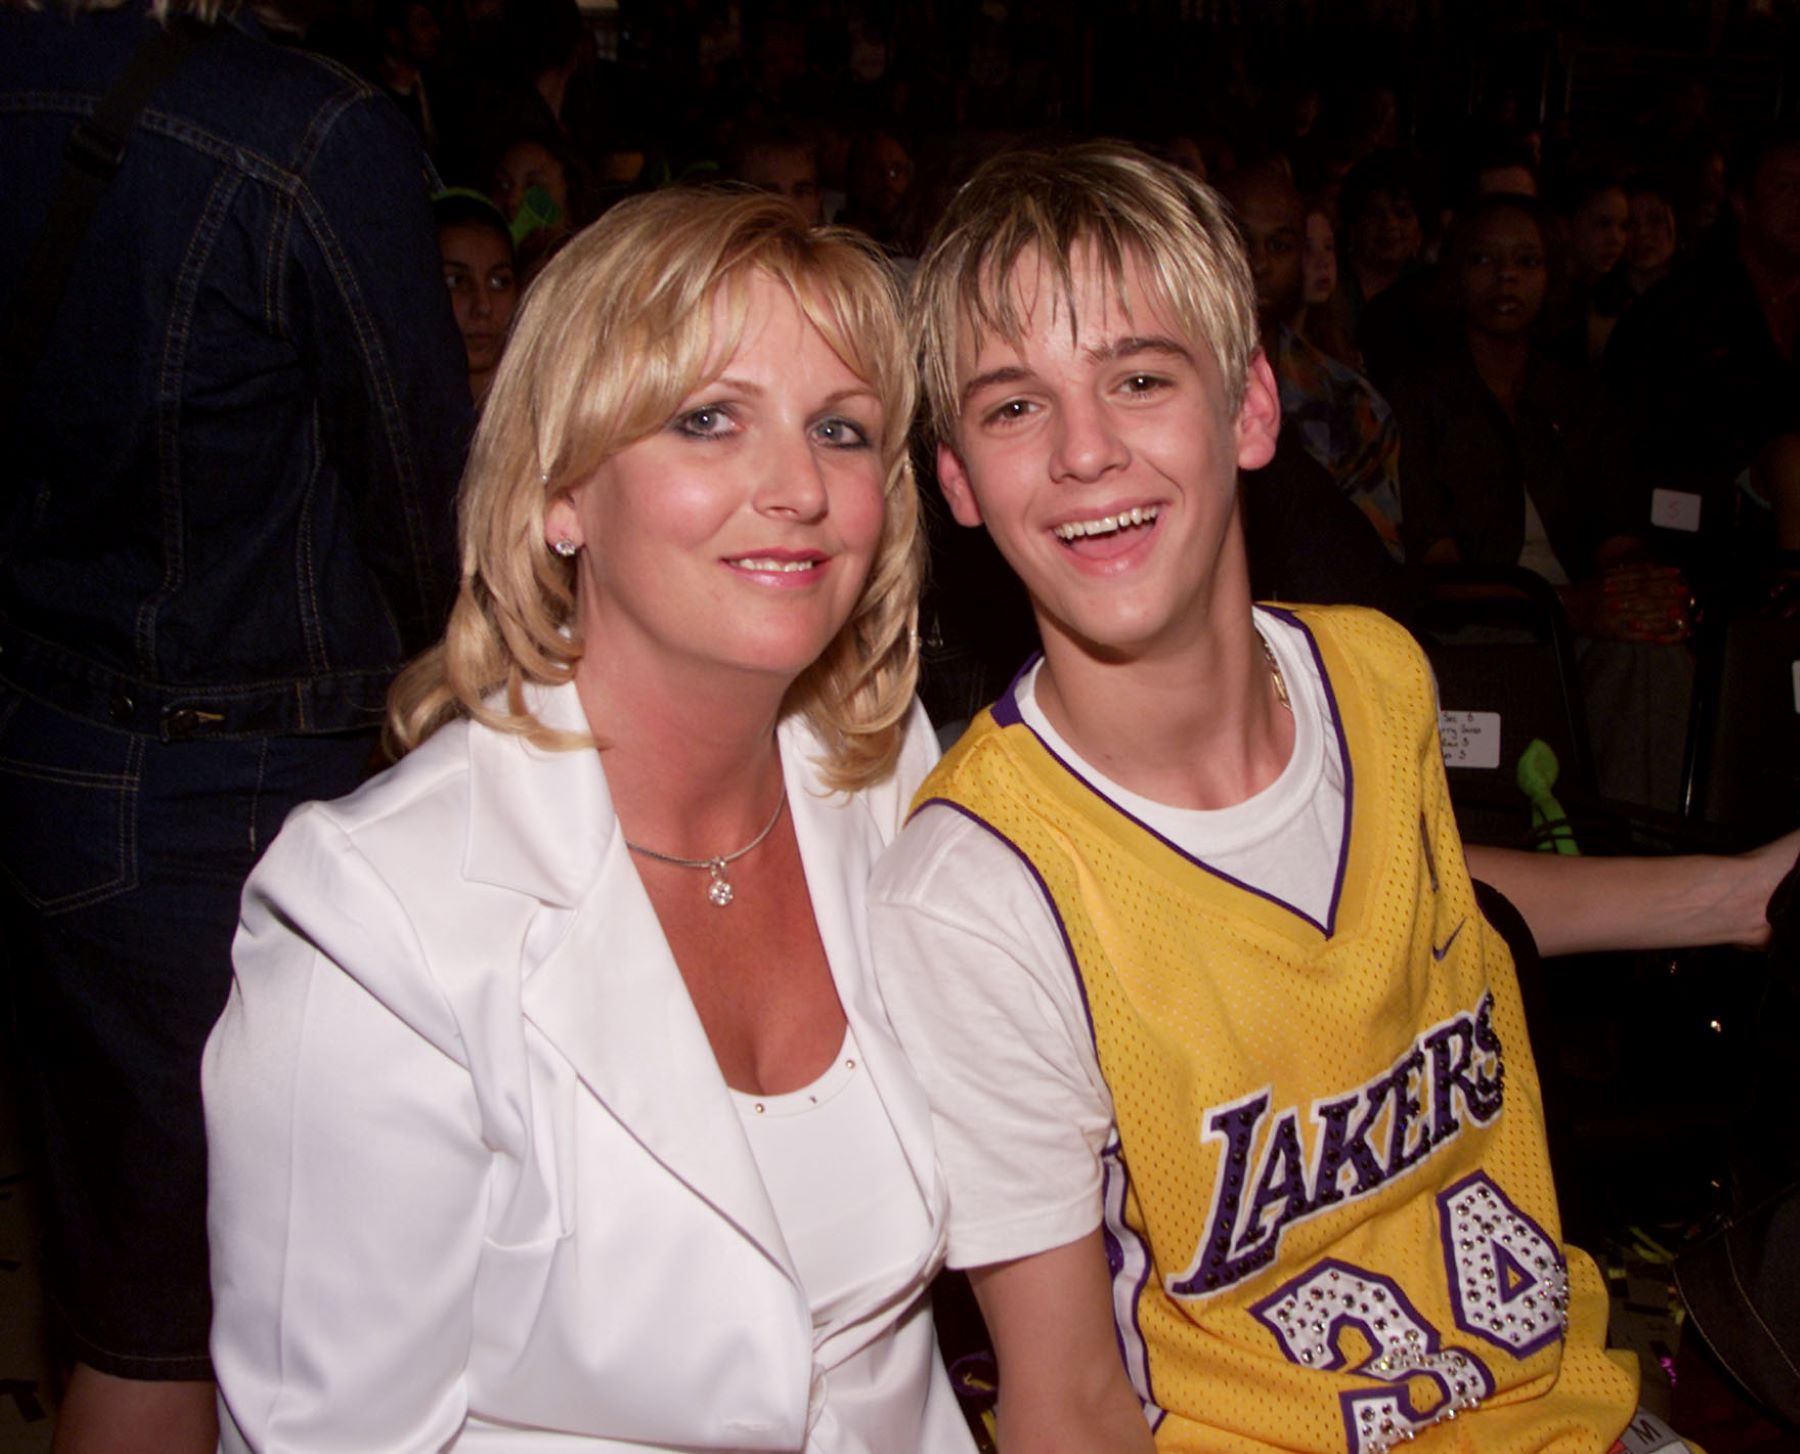 Aaron Carter and his mom attending Nickelodeon's 14th Annual Kids' Choice Awards at Barker Hanger